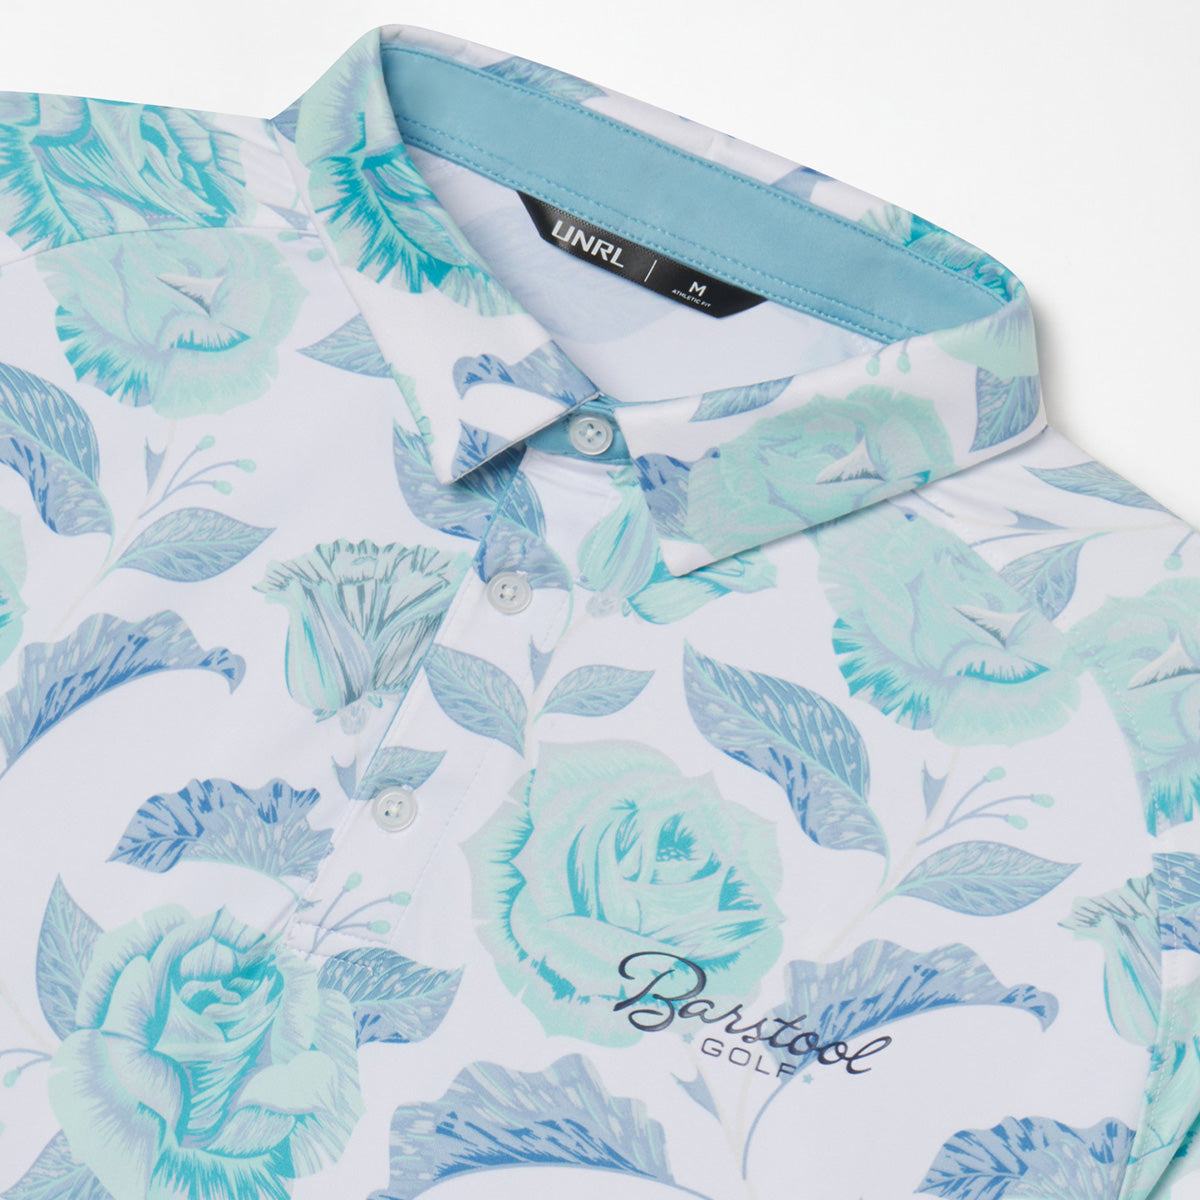 UNRL x Barstool Golf Floral Polo-Polos-Fore Play-Barstool Sports